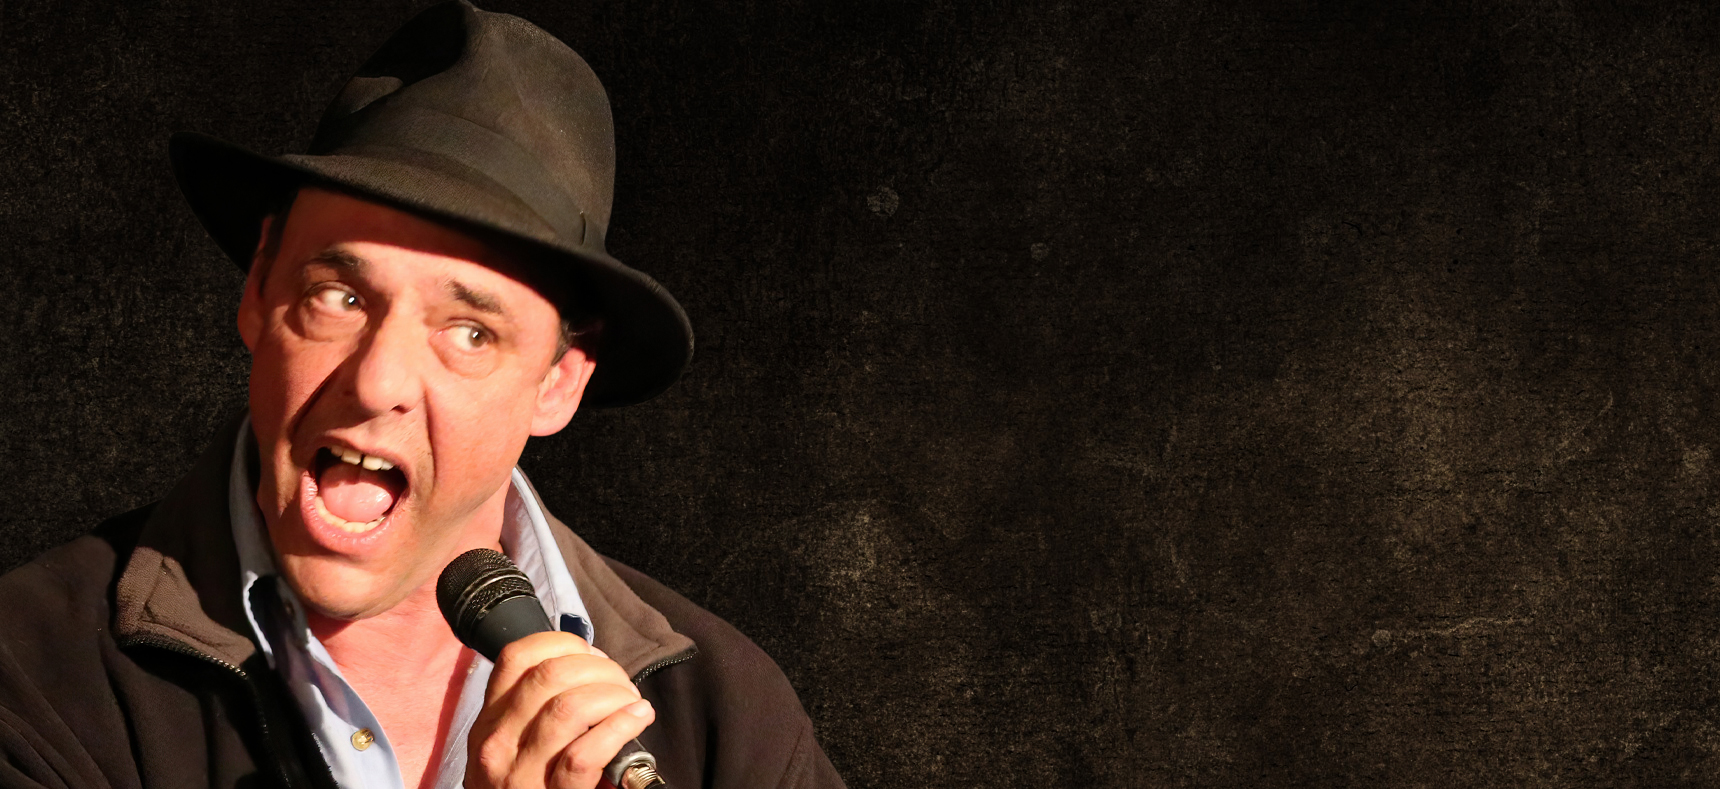 The hilarious Chris Clobber comes to Comedy Heights at Bay Bridge Brewing this Friday night.